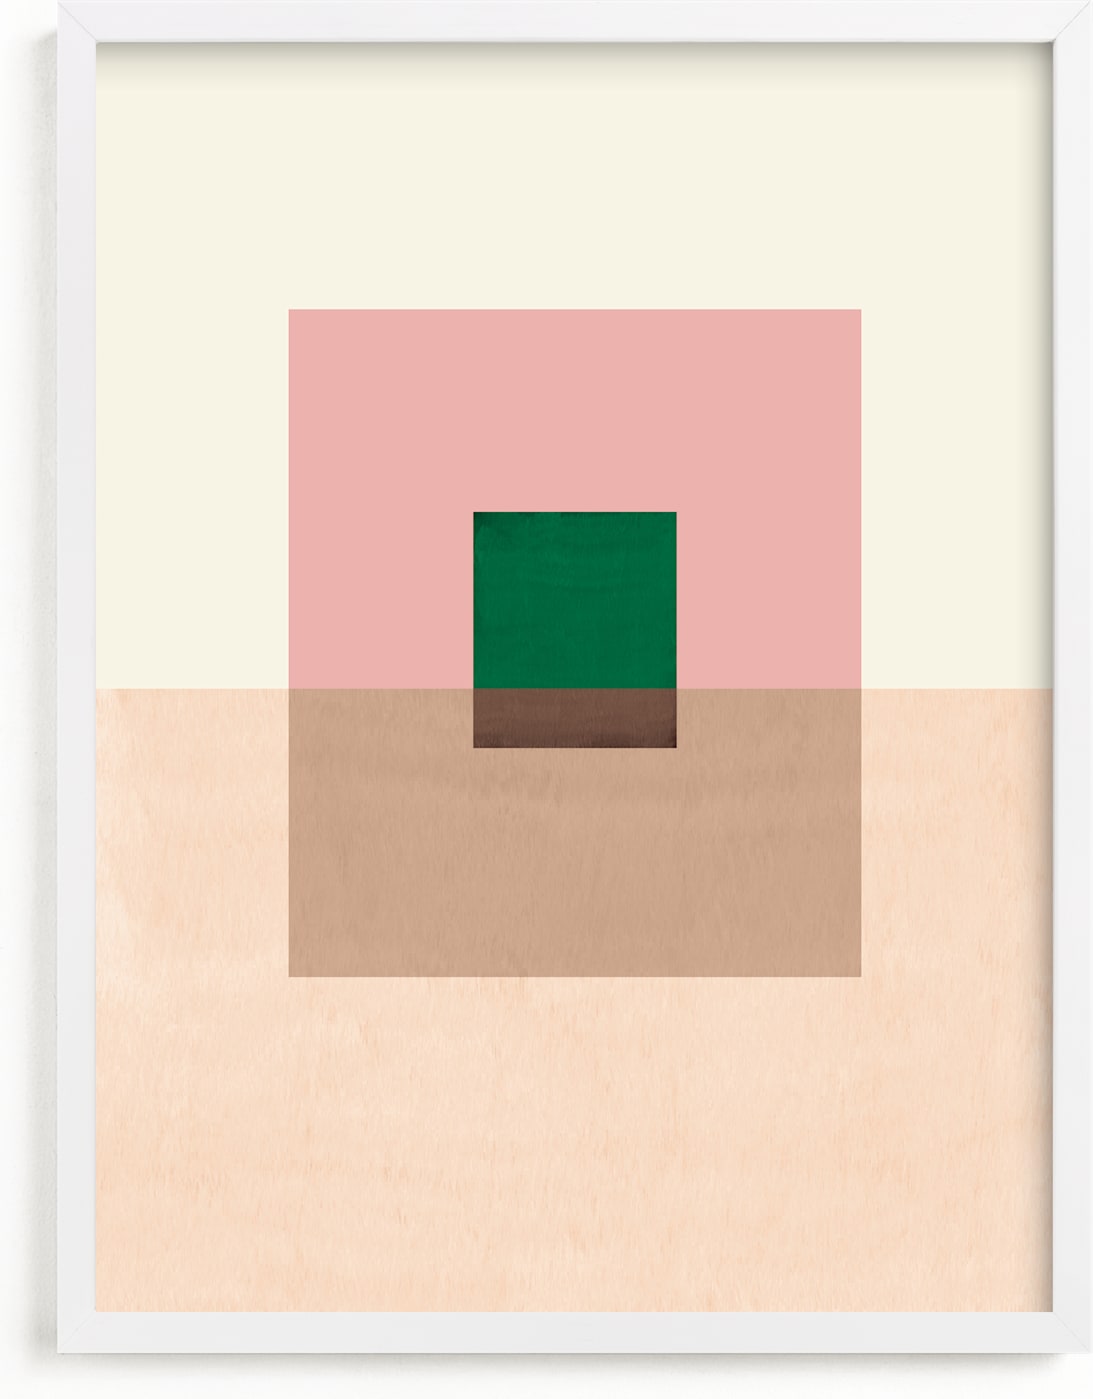 This is a pink, beige, green art by Baumbirdy called Neutral Shades.